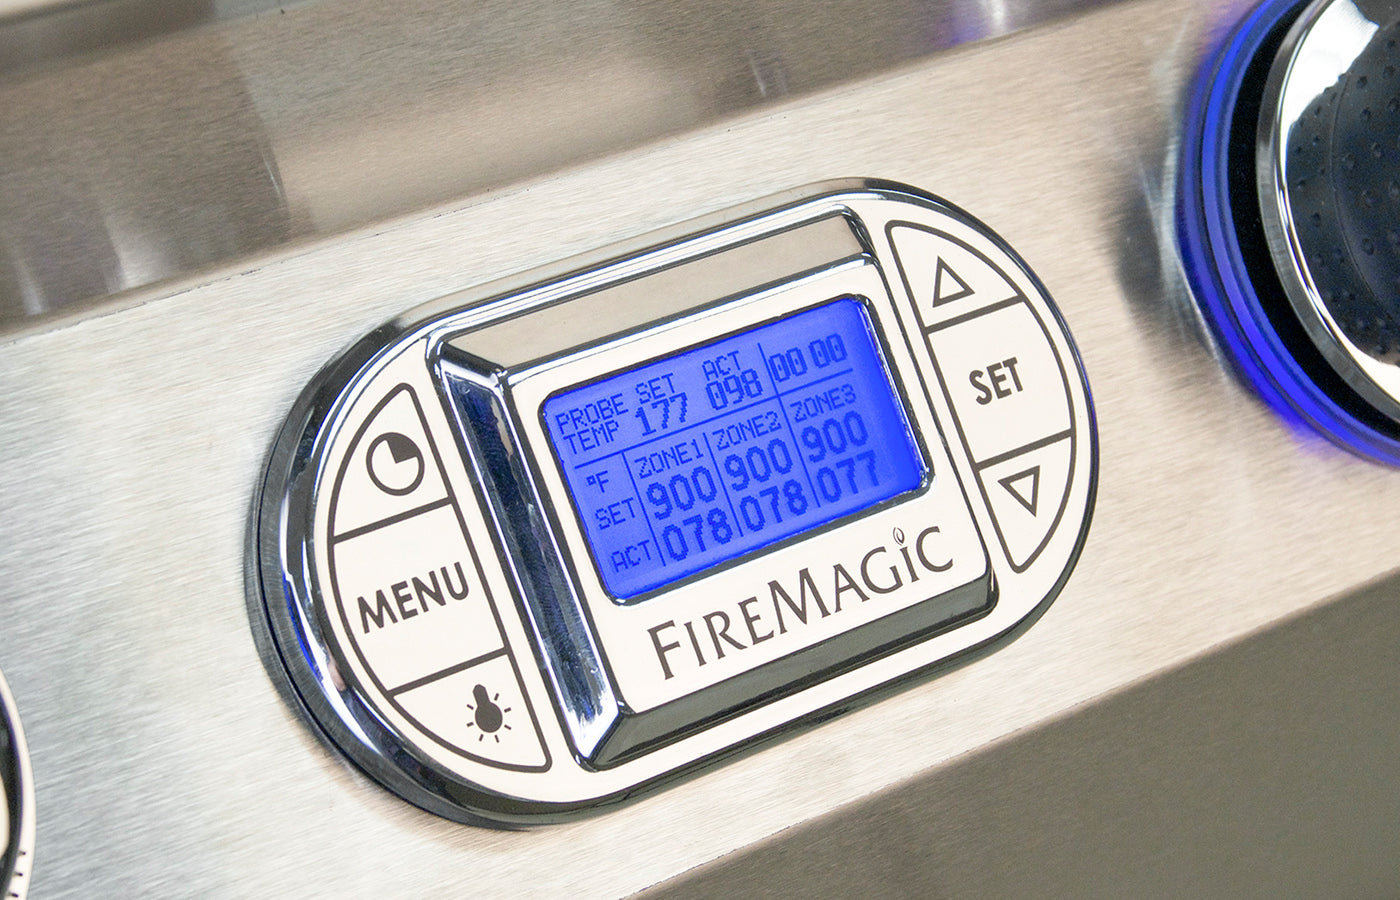 FireMagic Echelon E790i Built-In 36 in. Grill with Digital Thermometer and Window